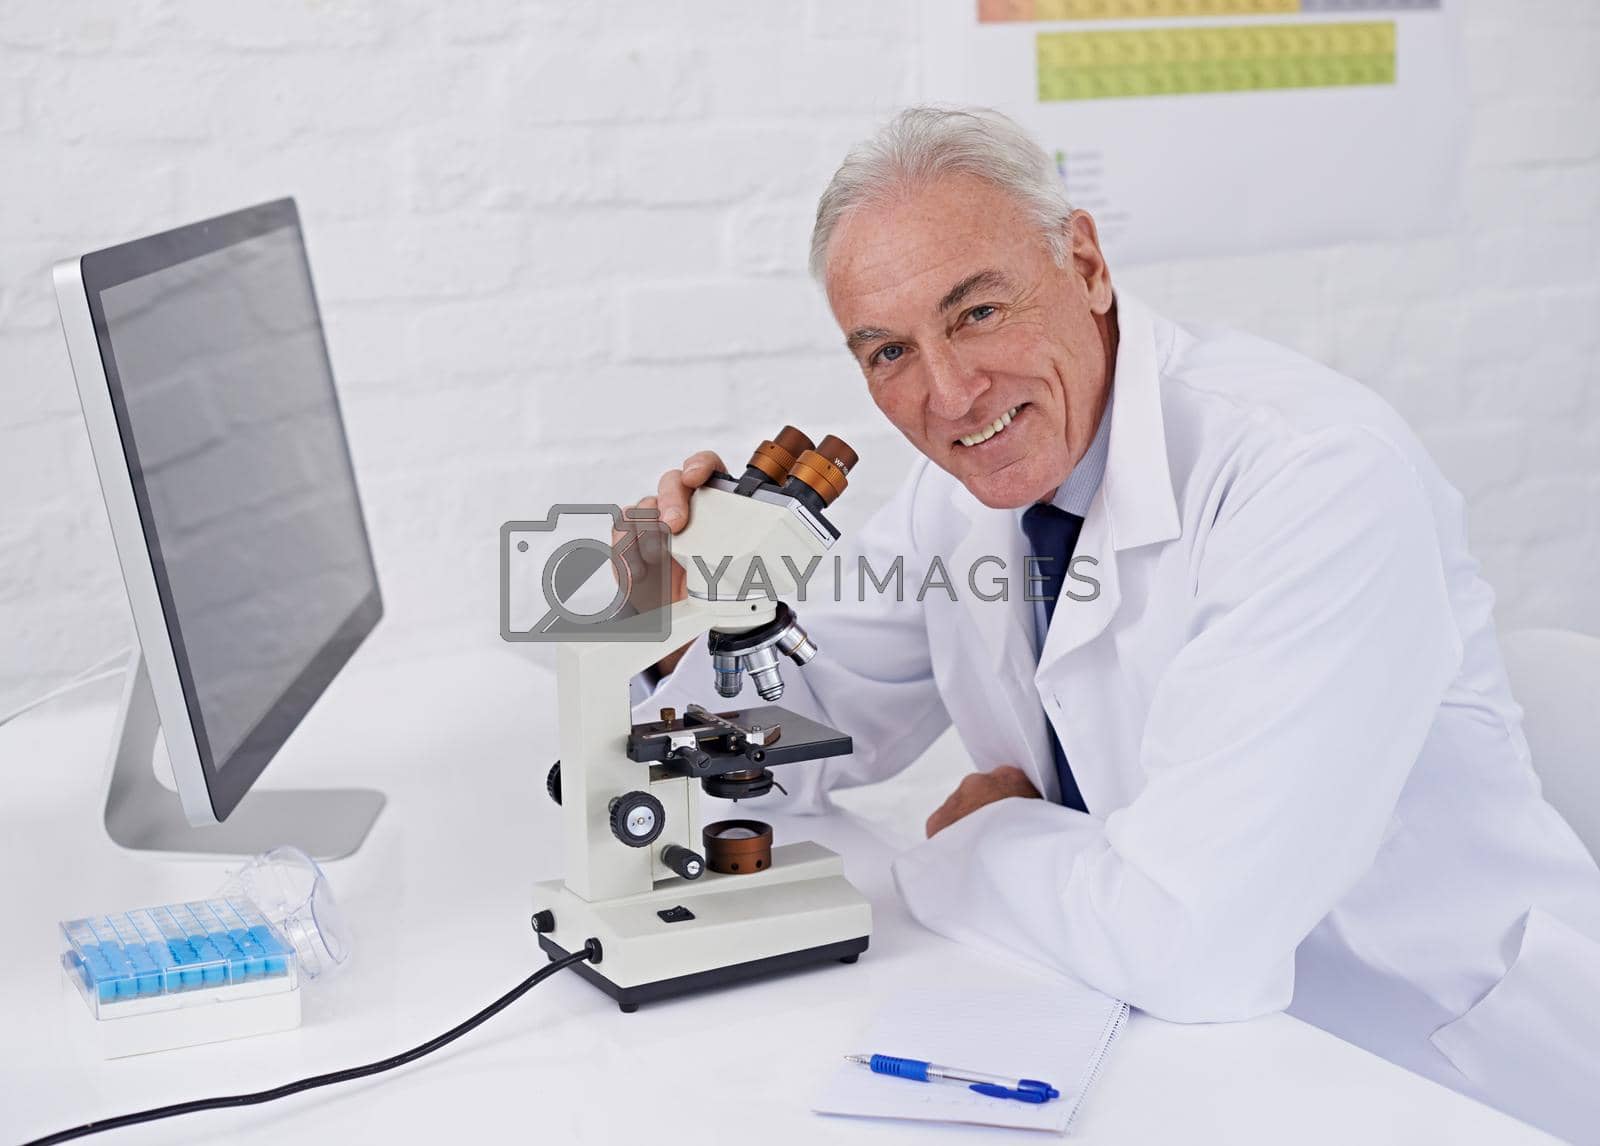 Royalty free image of I enjoy my job as a scientist. a mature scientist working in a lab. by YuriArcurs